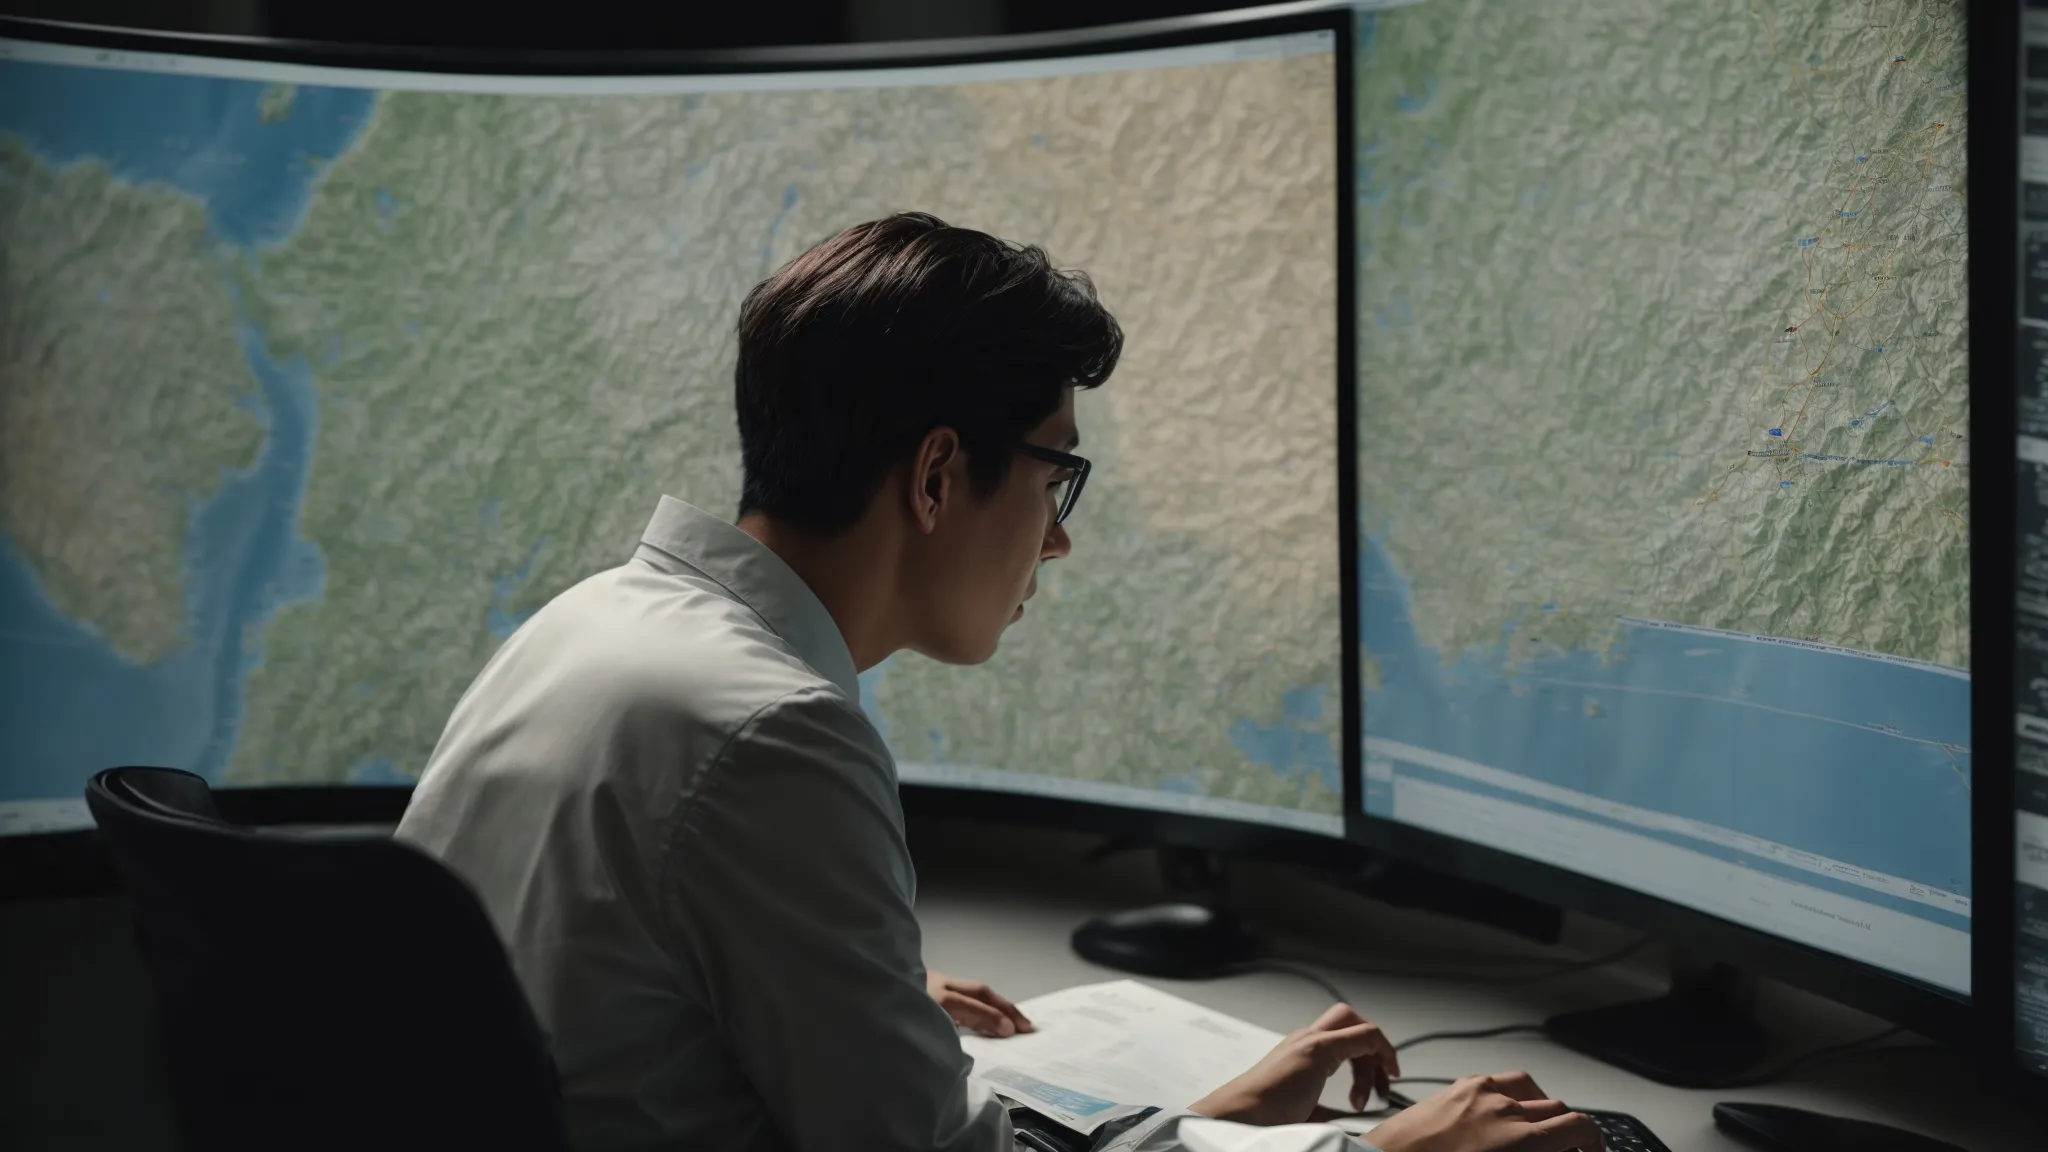 a person intently analyzing a digital map dotted with various landmarks and location pins on a computer screen.